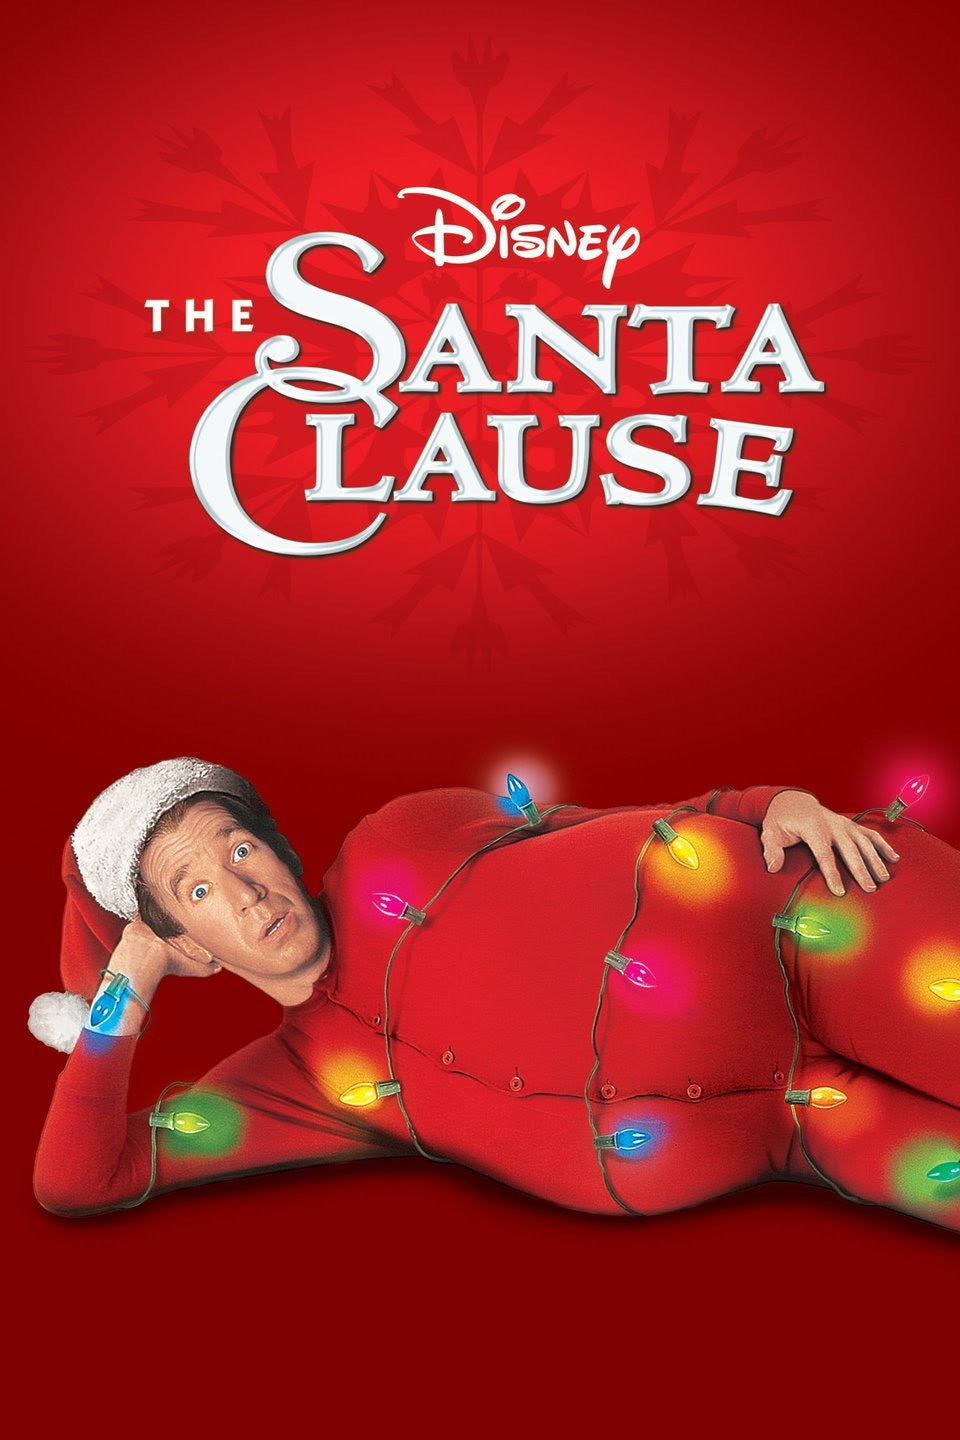 The Santa Clause (1994) Vudu or Movies Anywhere HD redemption only